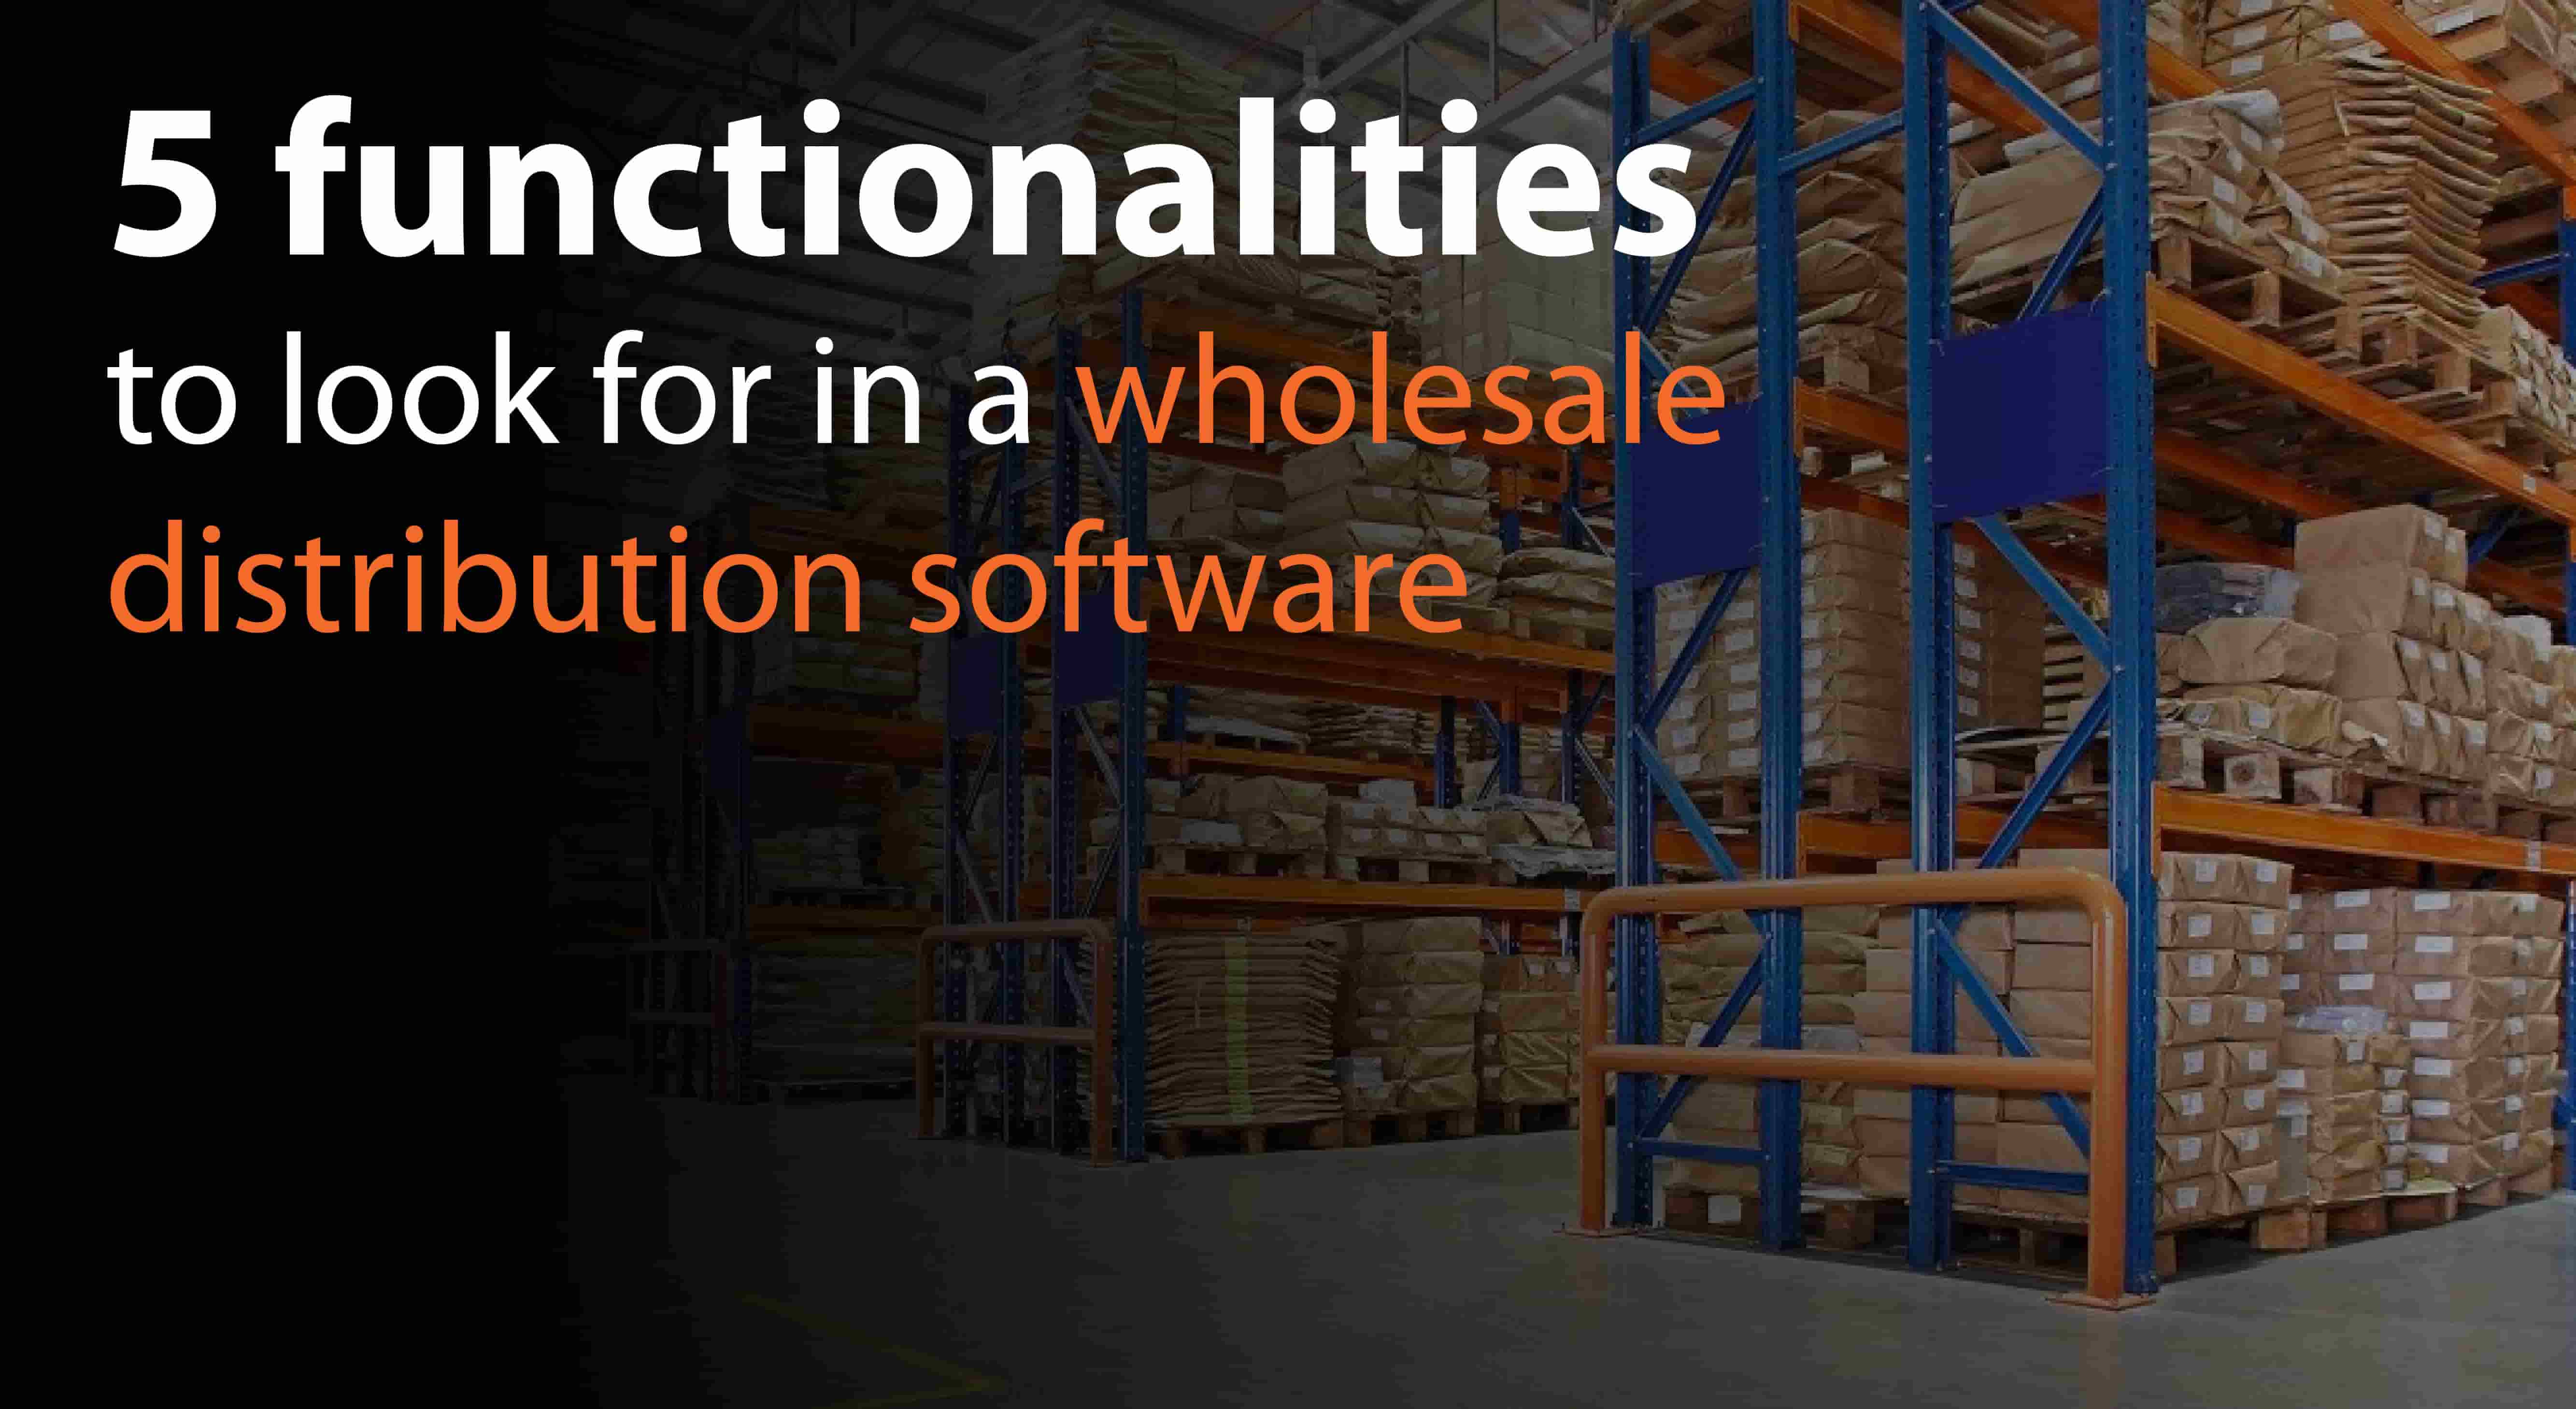 5 functionalities to look for in a wholesale distribution software